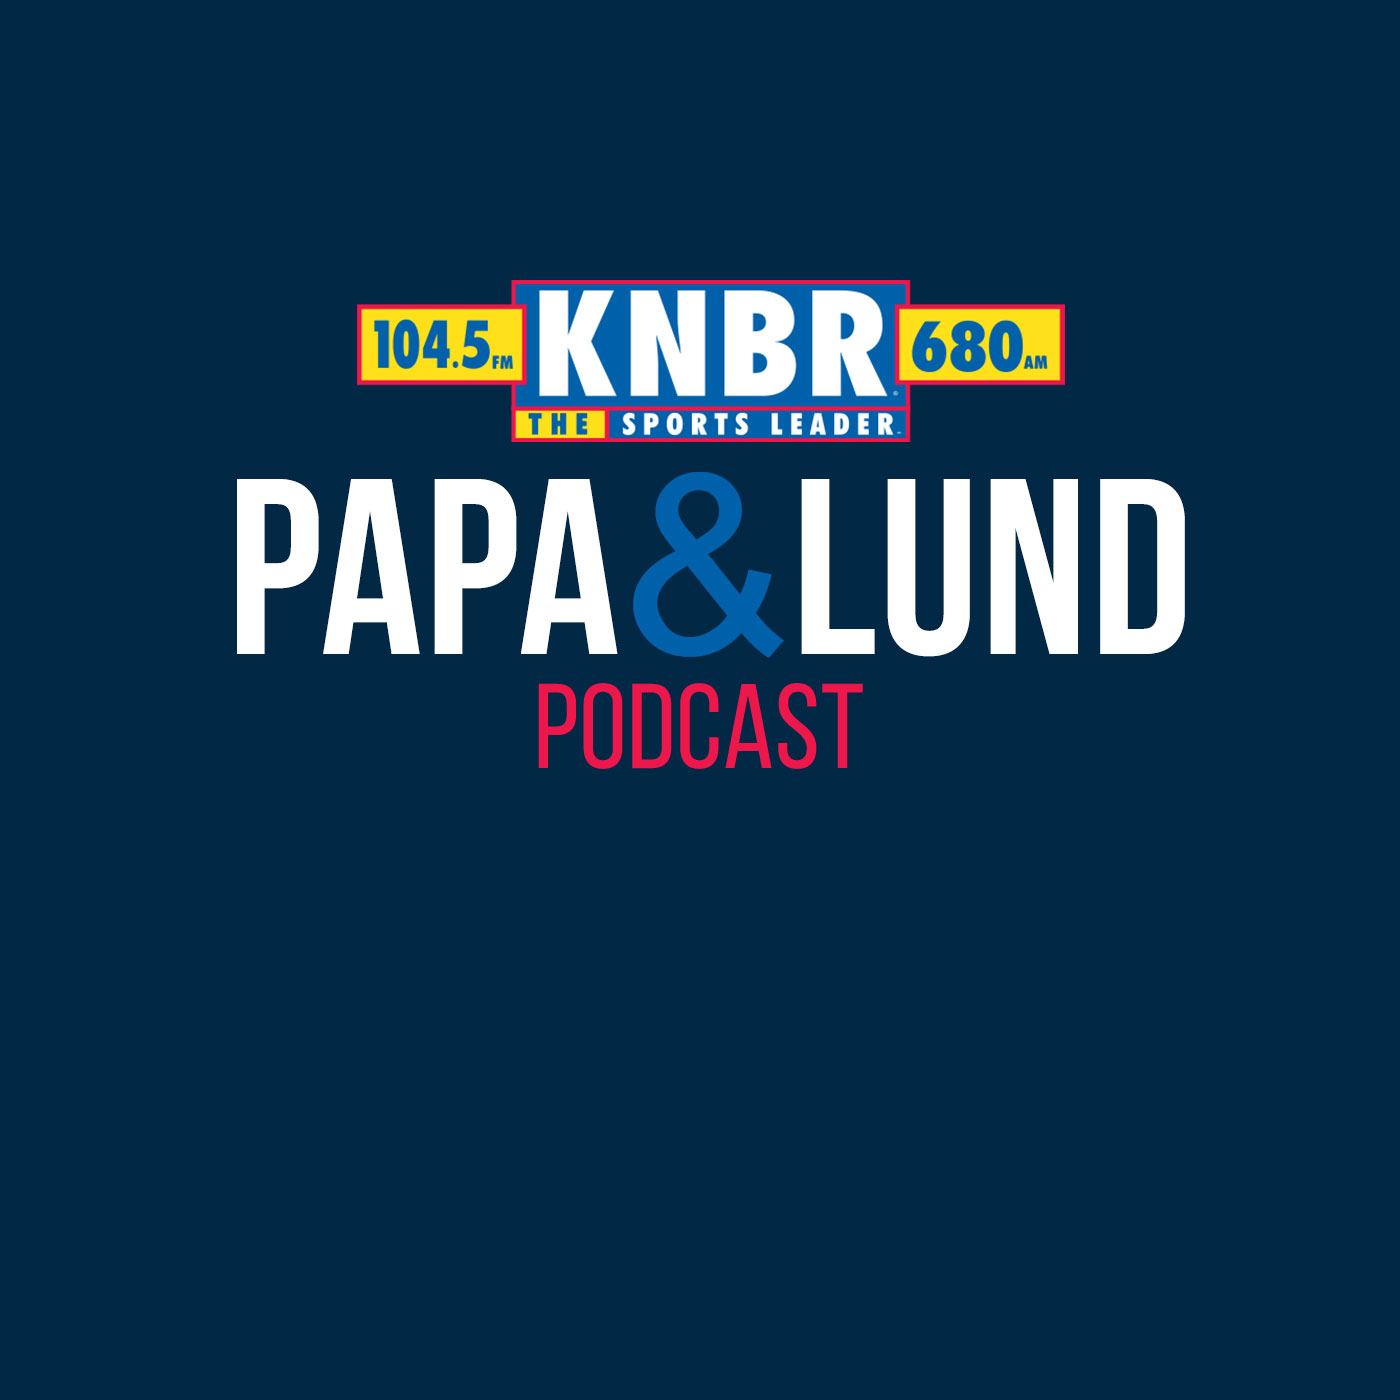 10-6 Andrew Baggarly joins Papa & Lund to discuss who are the likely candidates for the Giants open managerial position